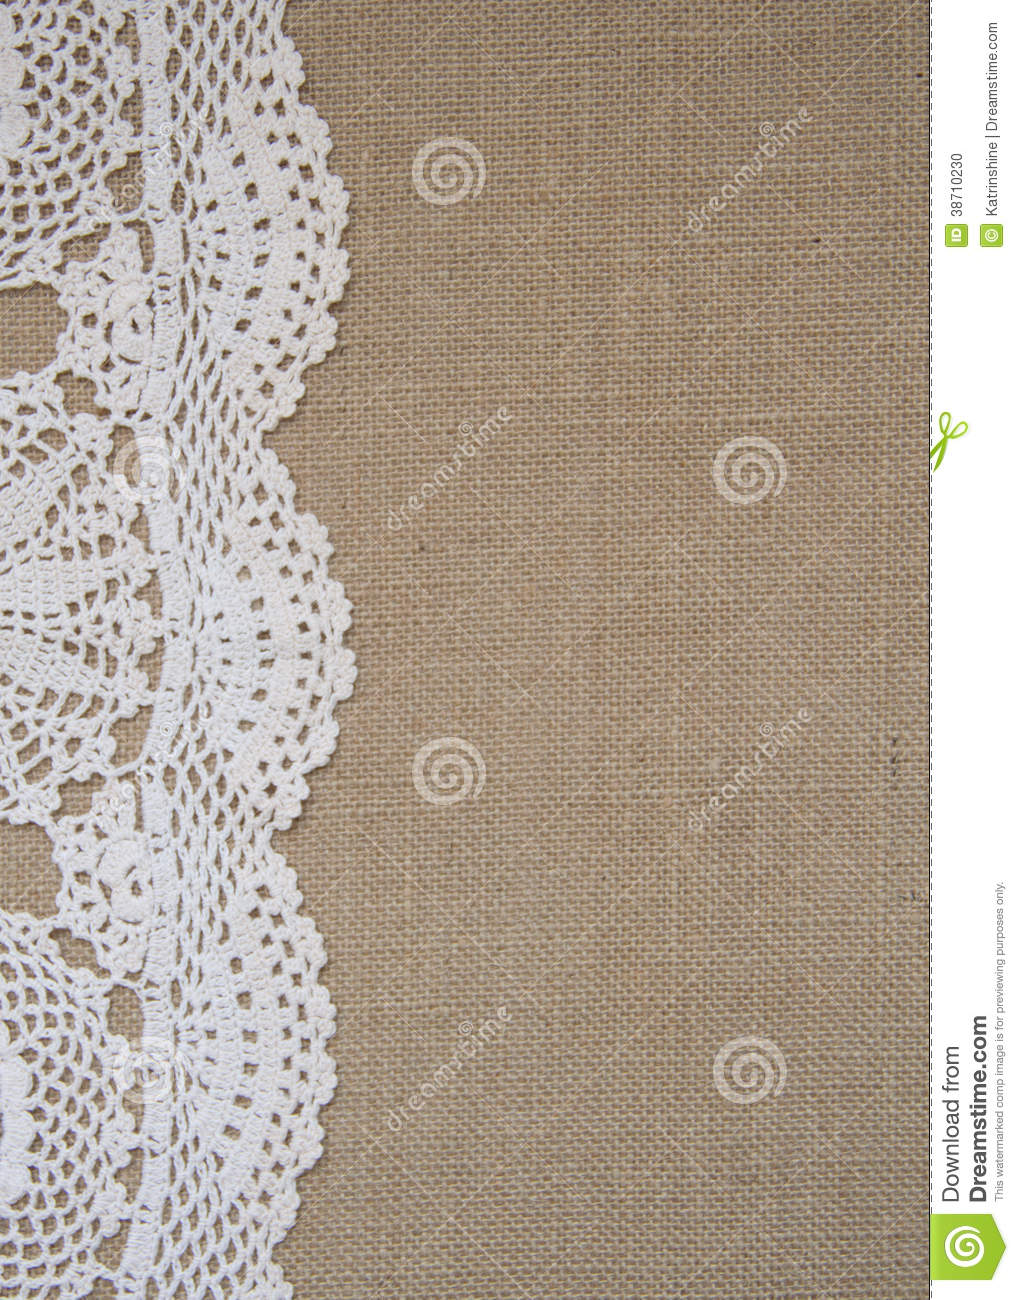 Burlap And Lace Background With